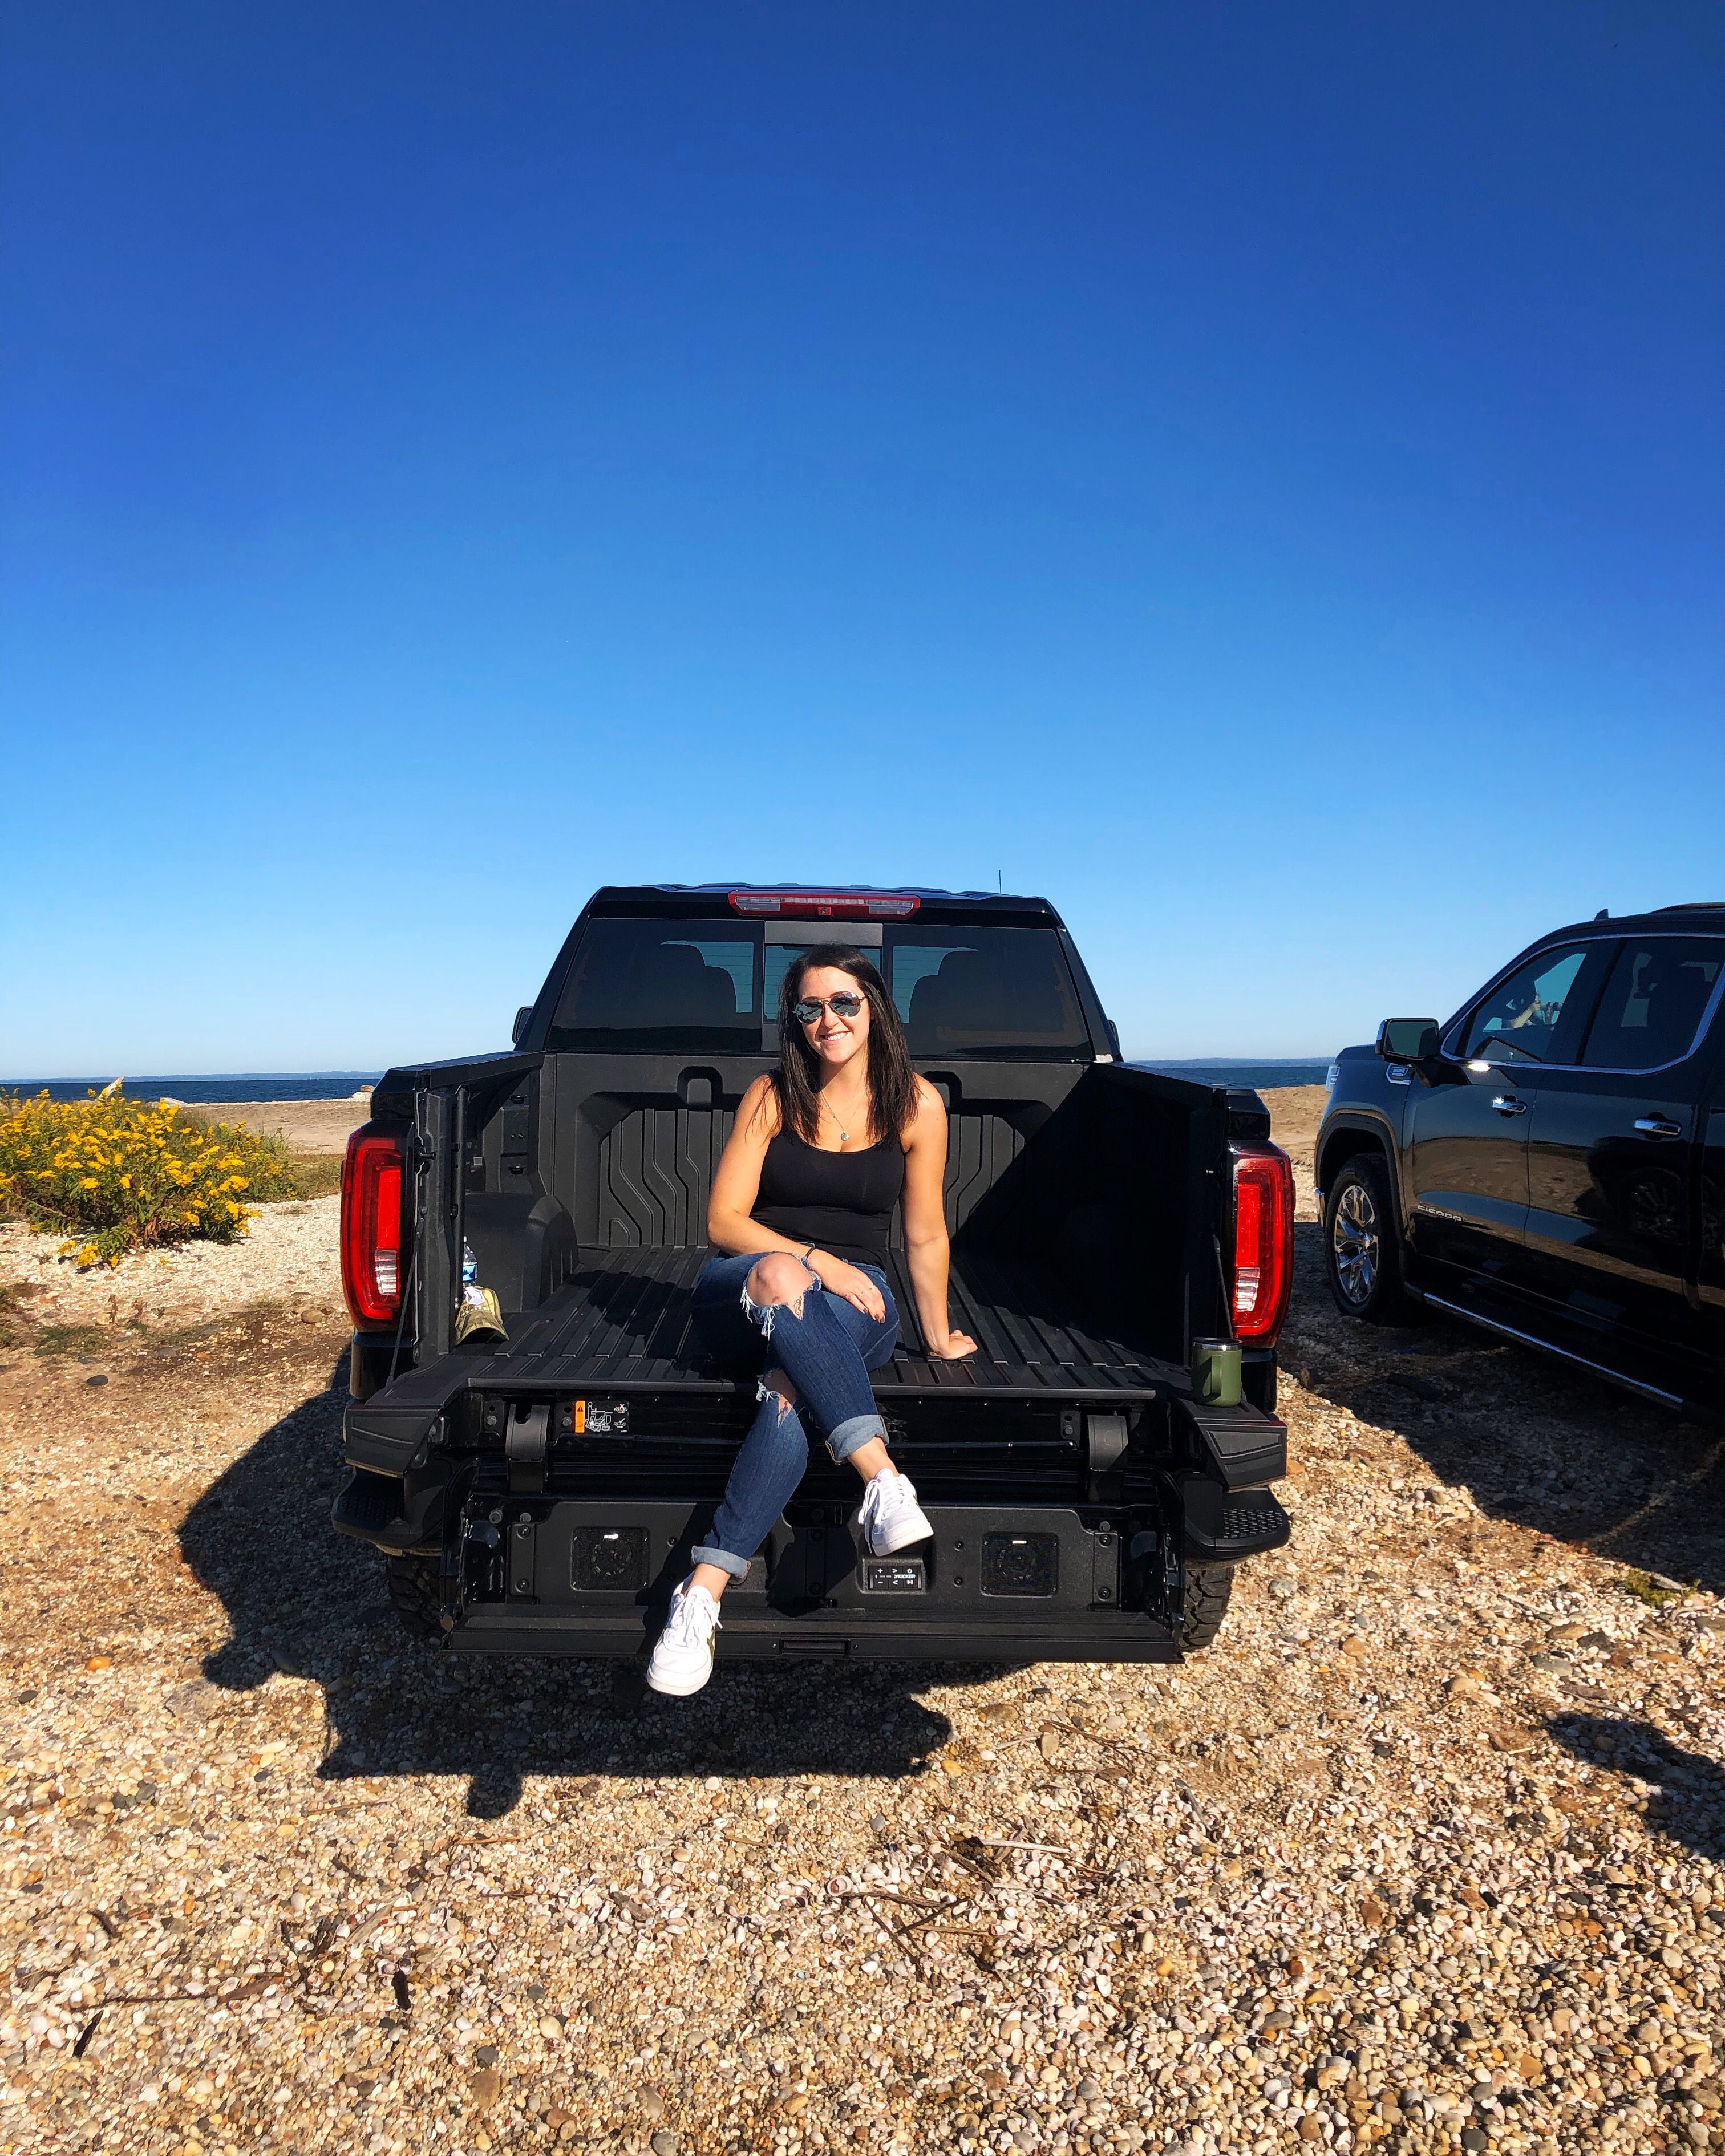 Big Dick In Beach - BTEâ€”Big Truck Energyâ€”Is The Confidence Boost You Didn't Know You Needed